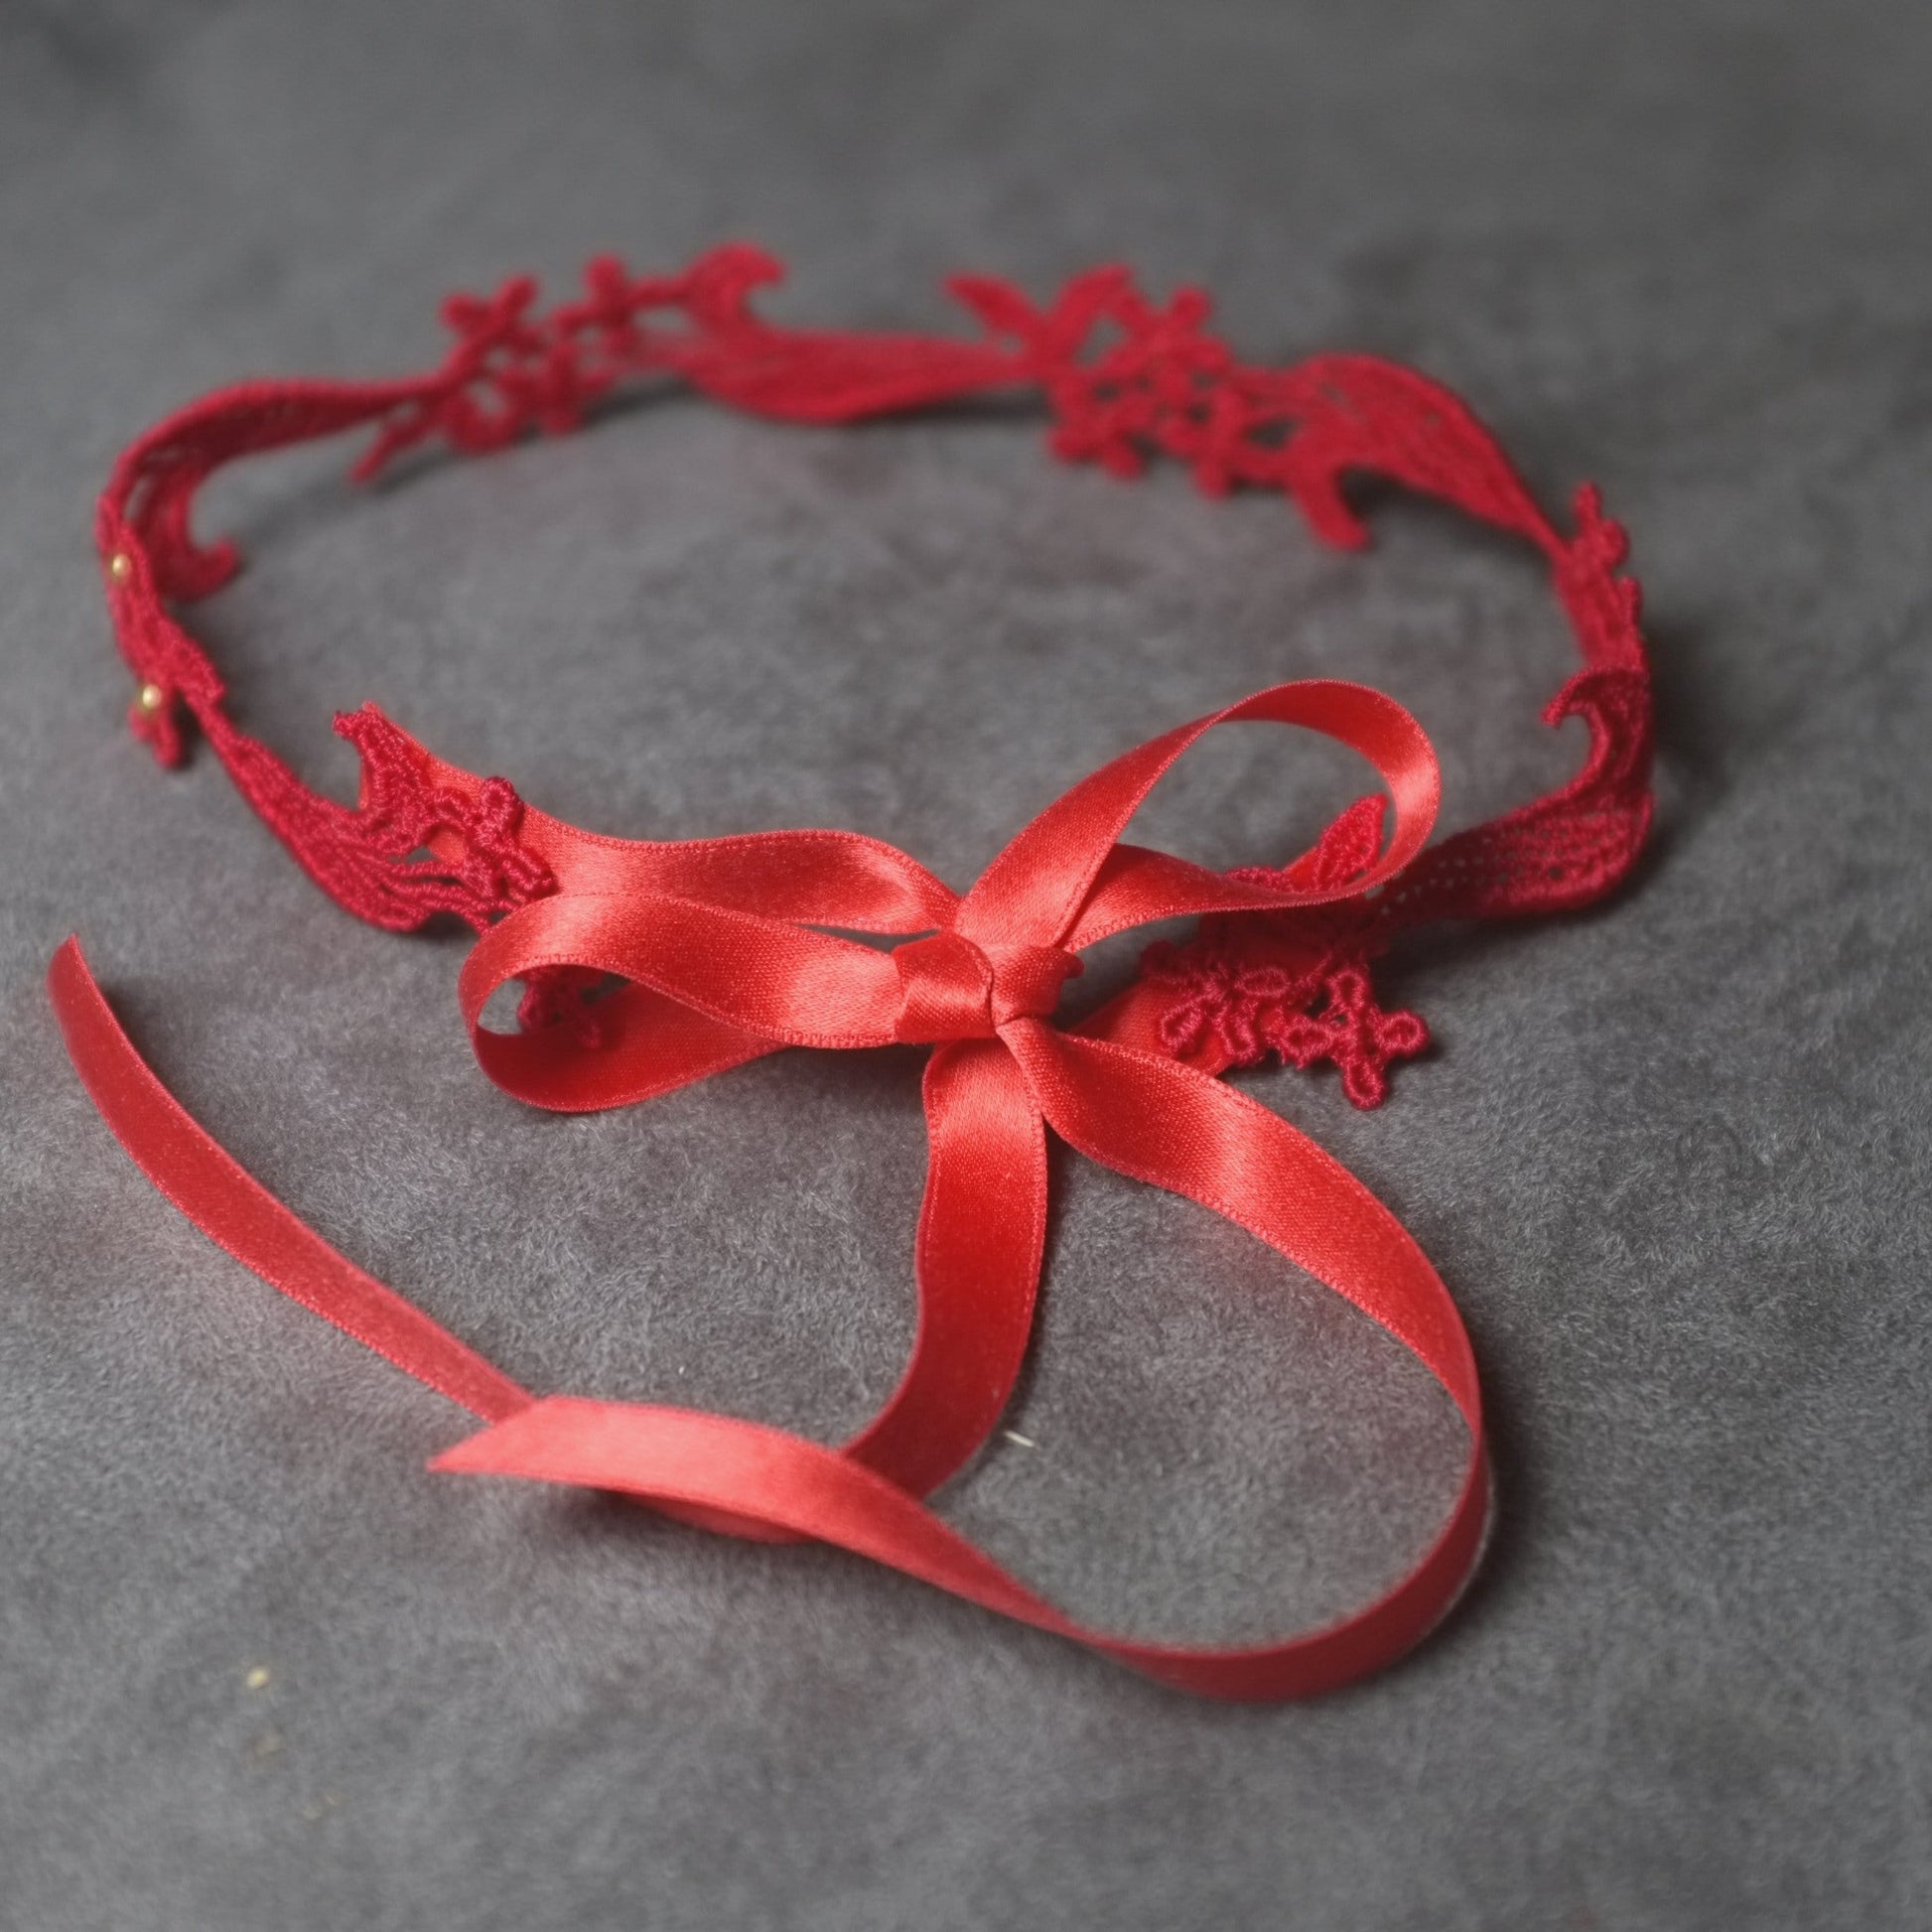 Studded Choker Necklace with silk ribbon as closure.